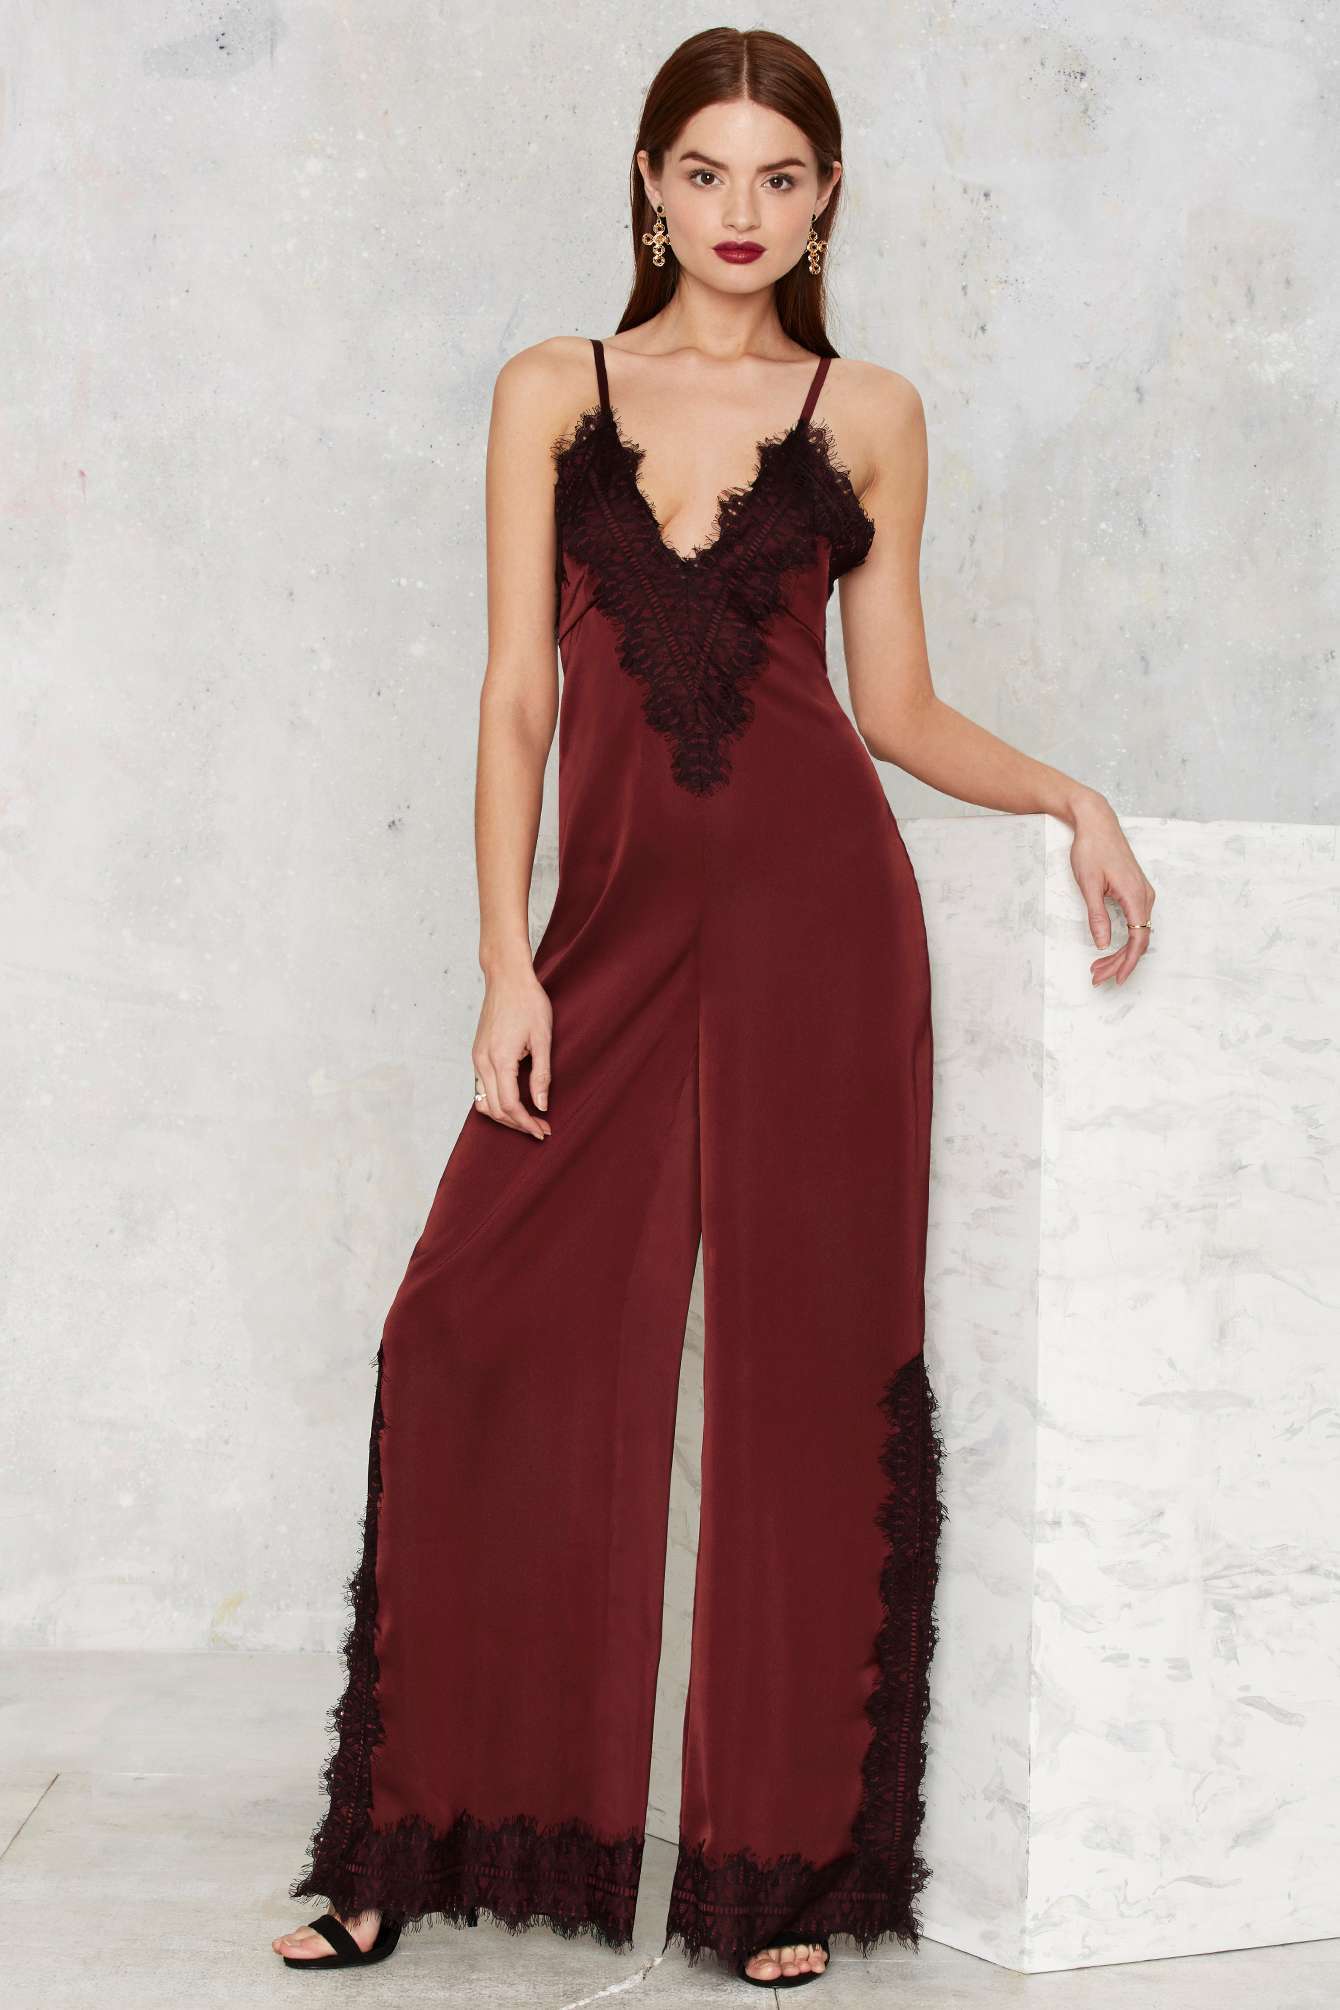 Lady in Red: 15 Finds That Will Make Your Valentine's Day Pop!
